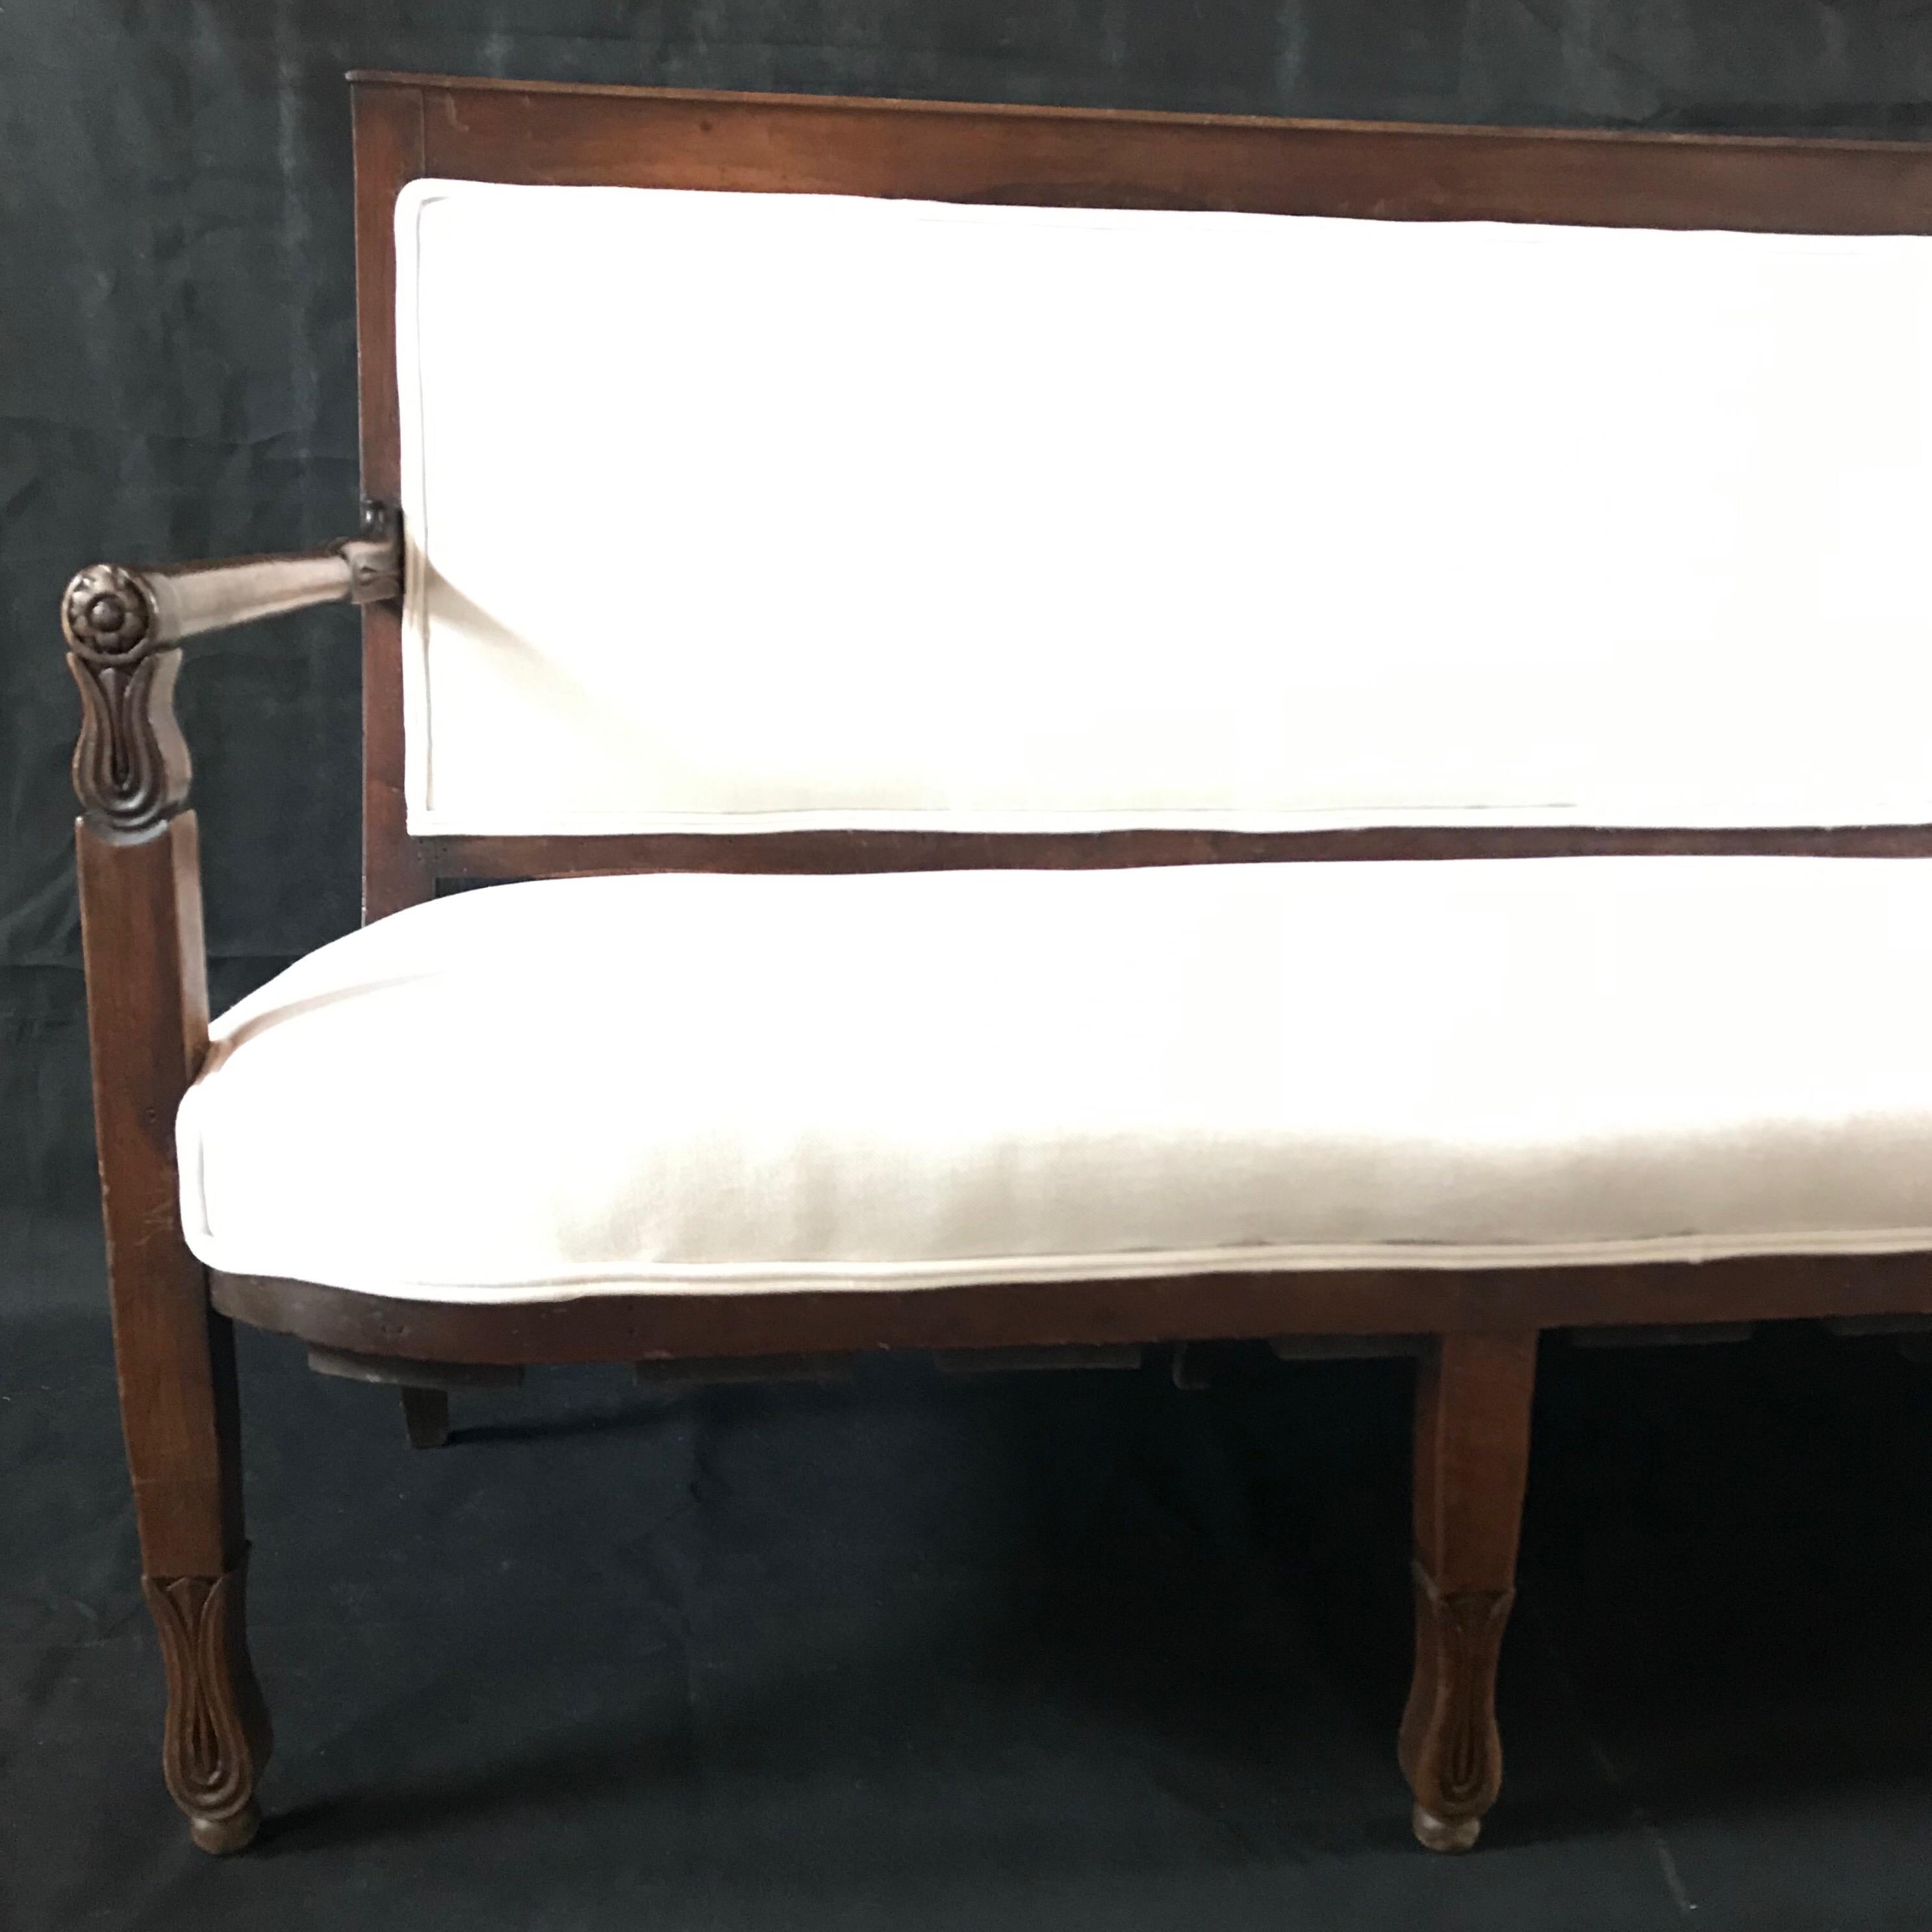 Upholstery Classic French Empire Walnut Sofa Bench Settee with Tulips